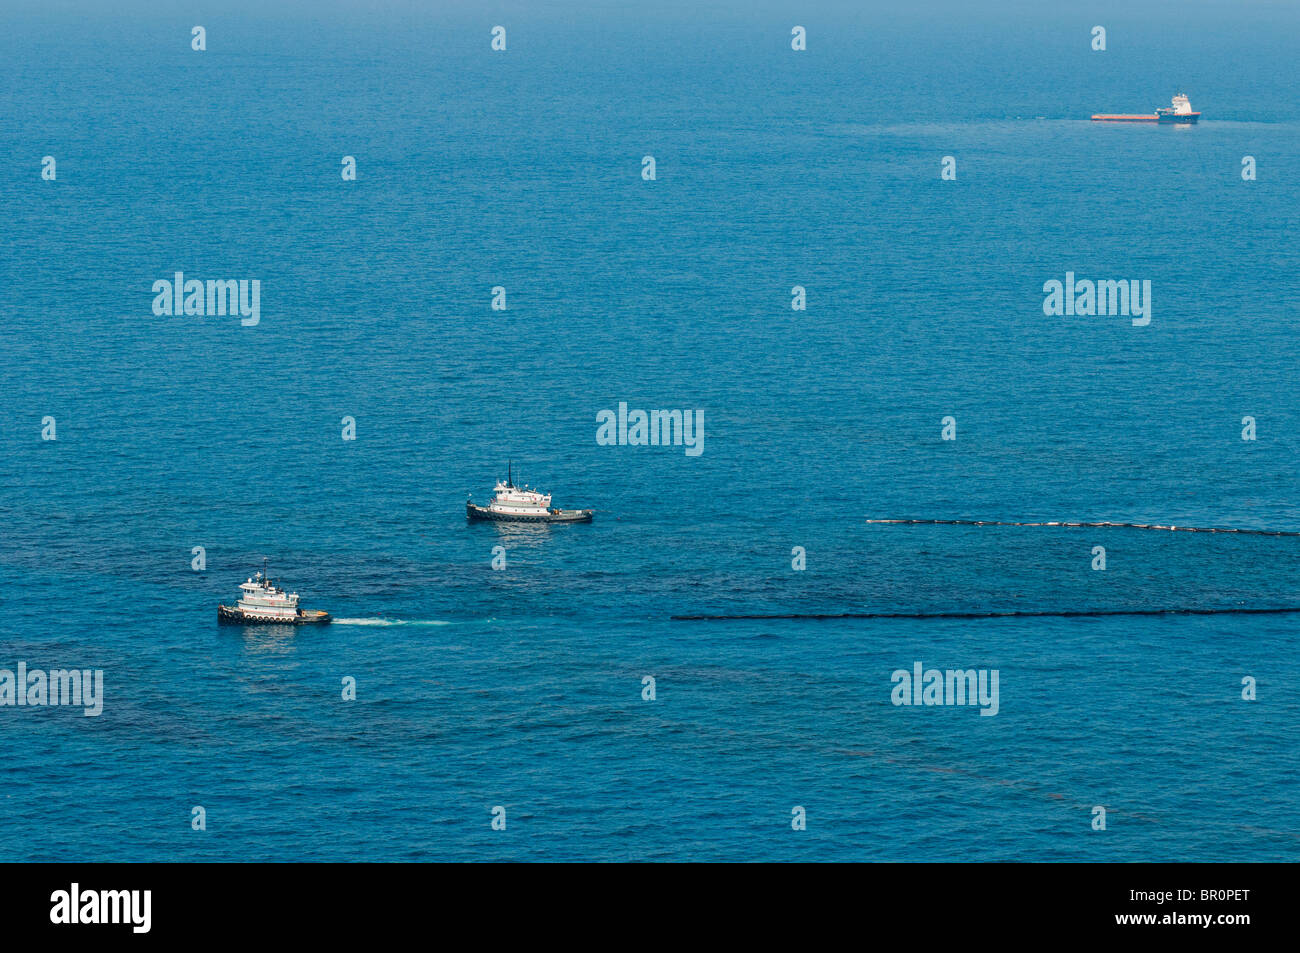 Oil skimming boats collecting oil three miles north of the source MC 252 site, Gulf of Mexico, USA. Stock Photo